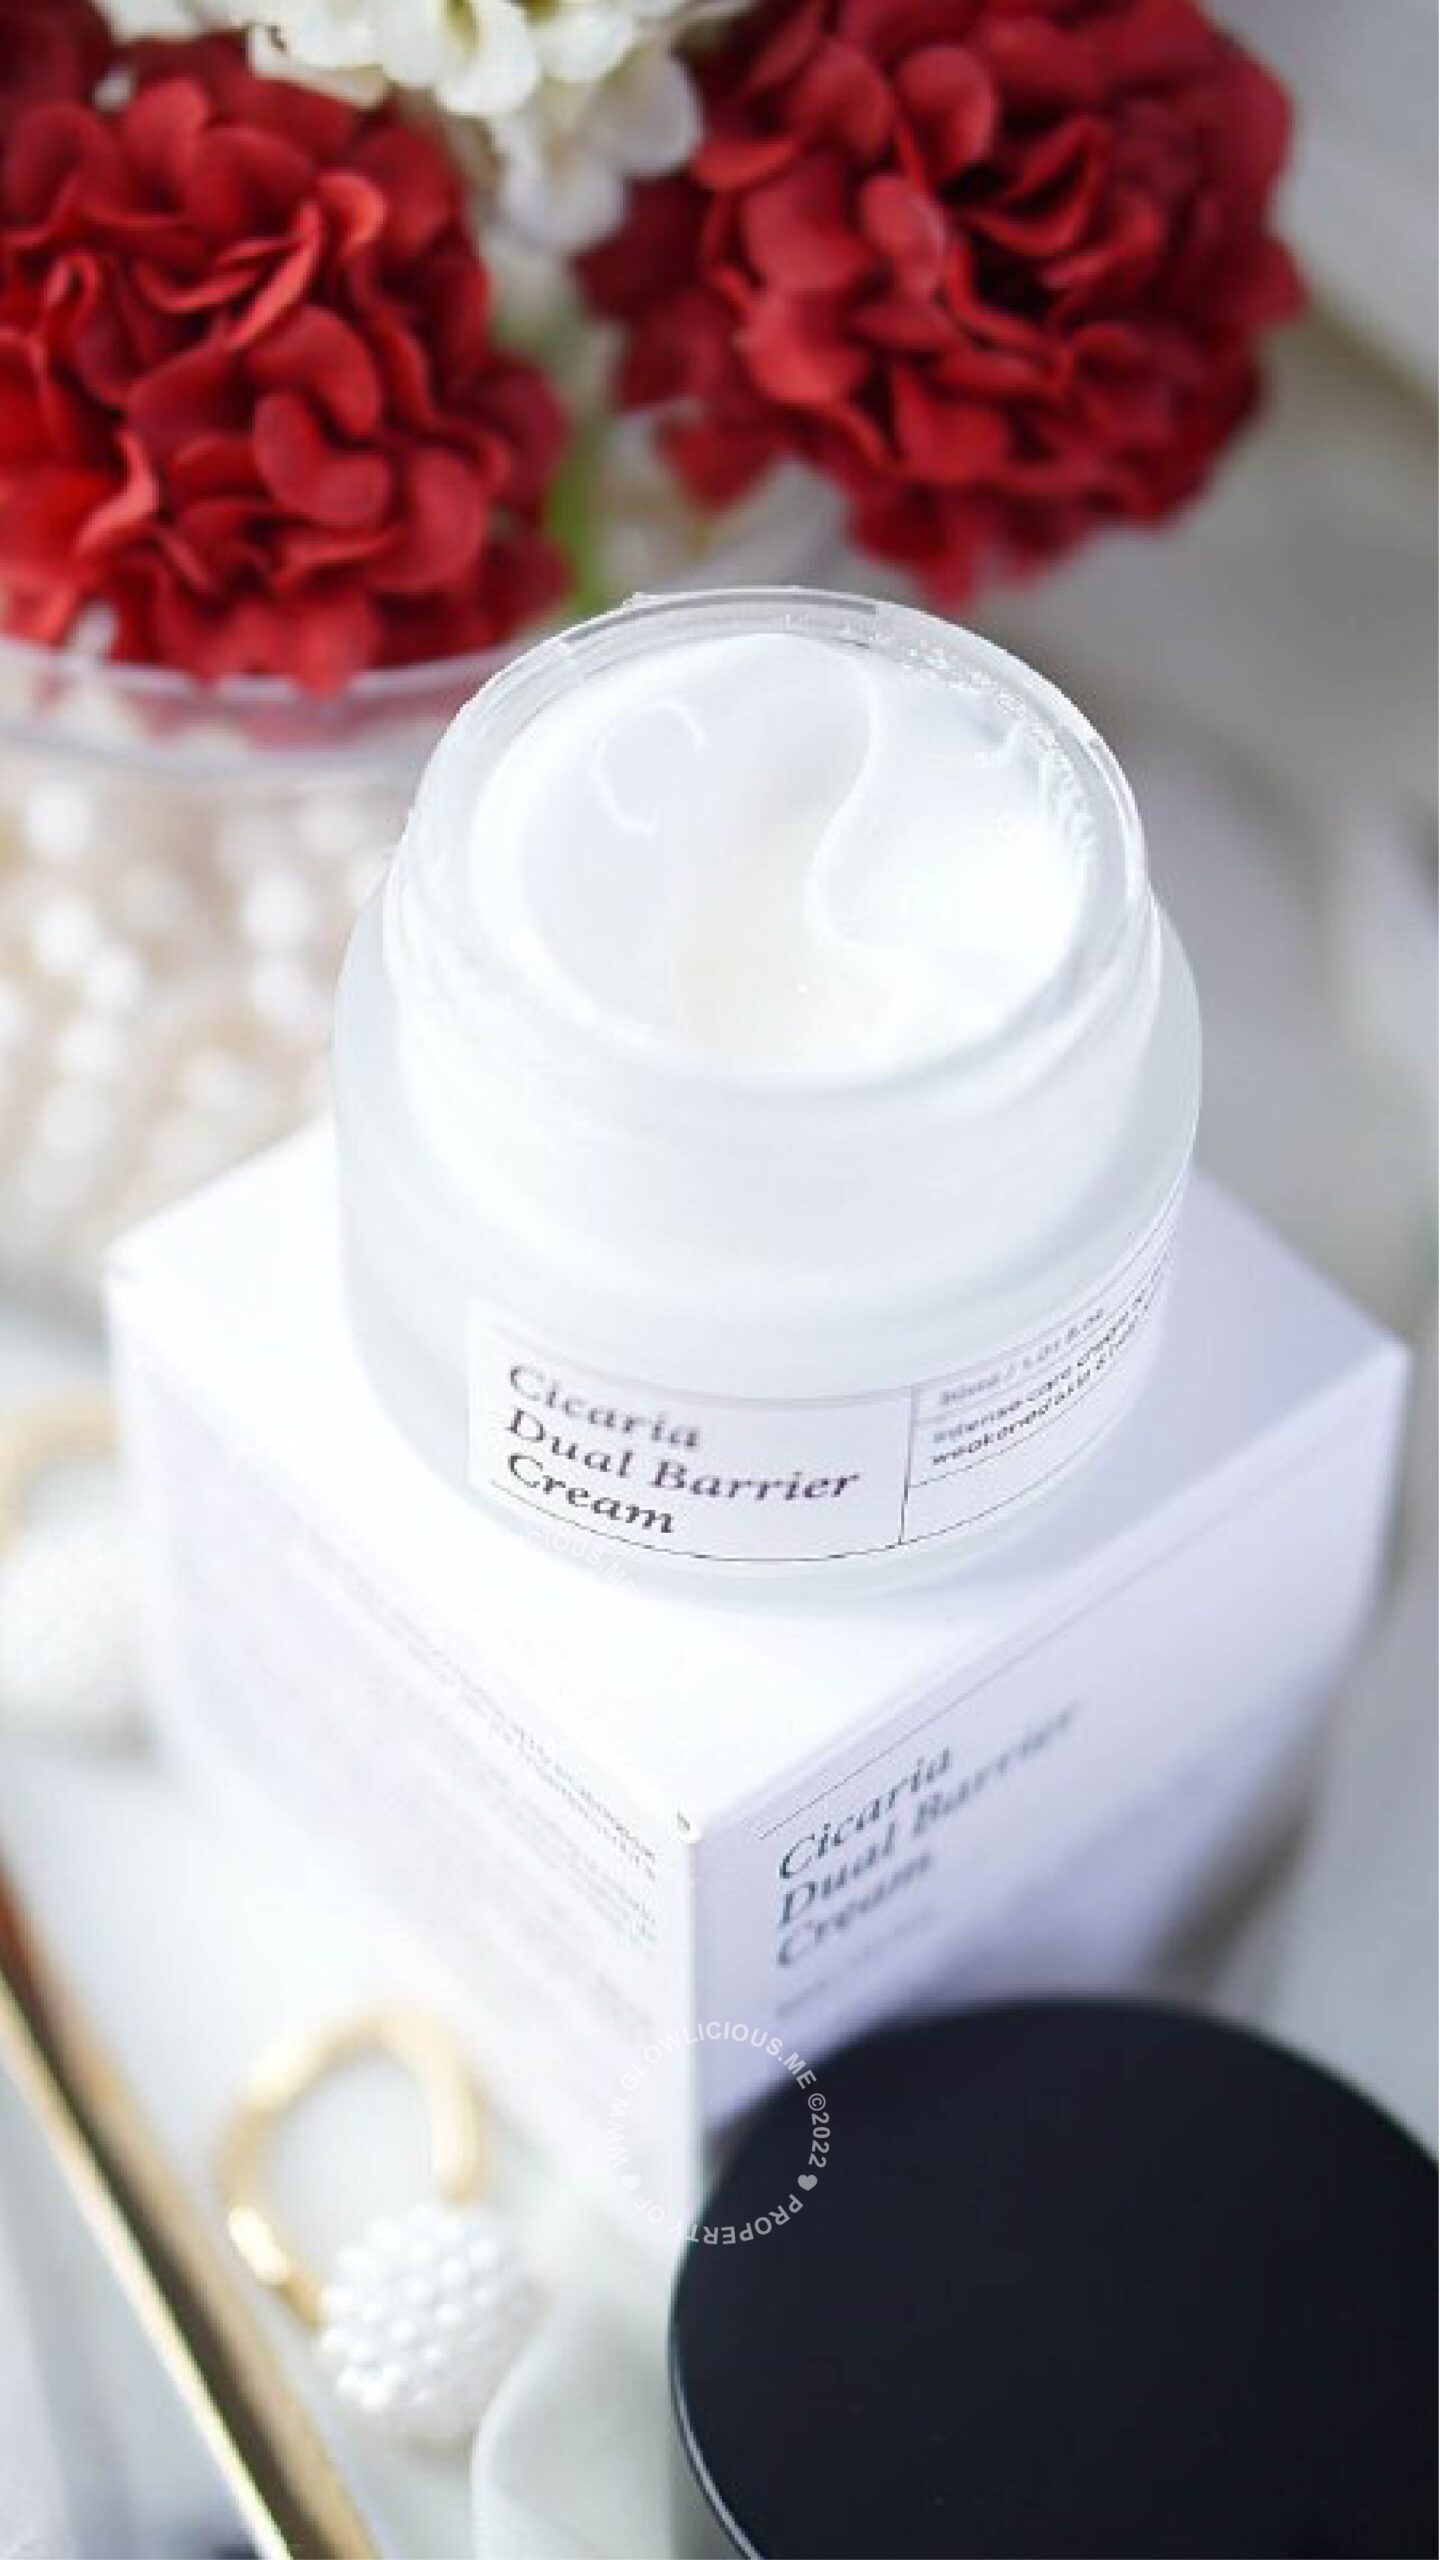 Review Chiyou Cicaria Dual Barrier Cream - Chiyou Skin Series 2